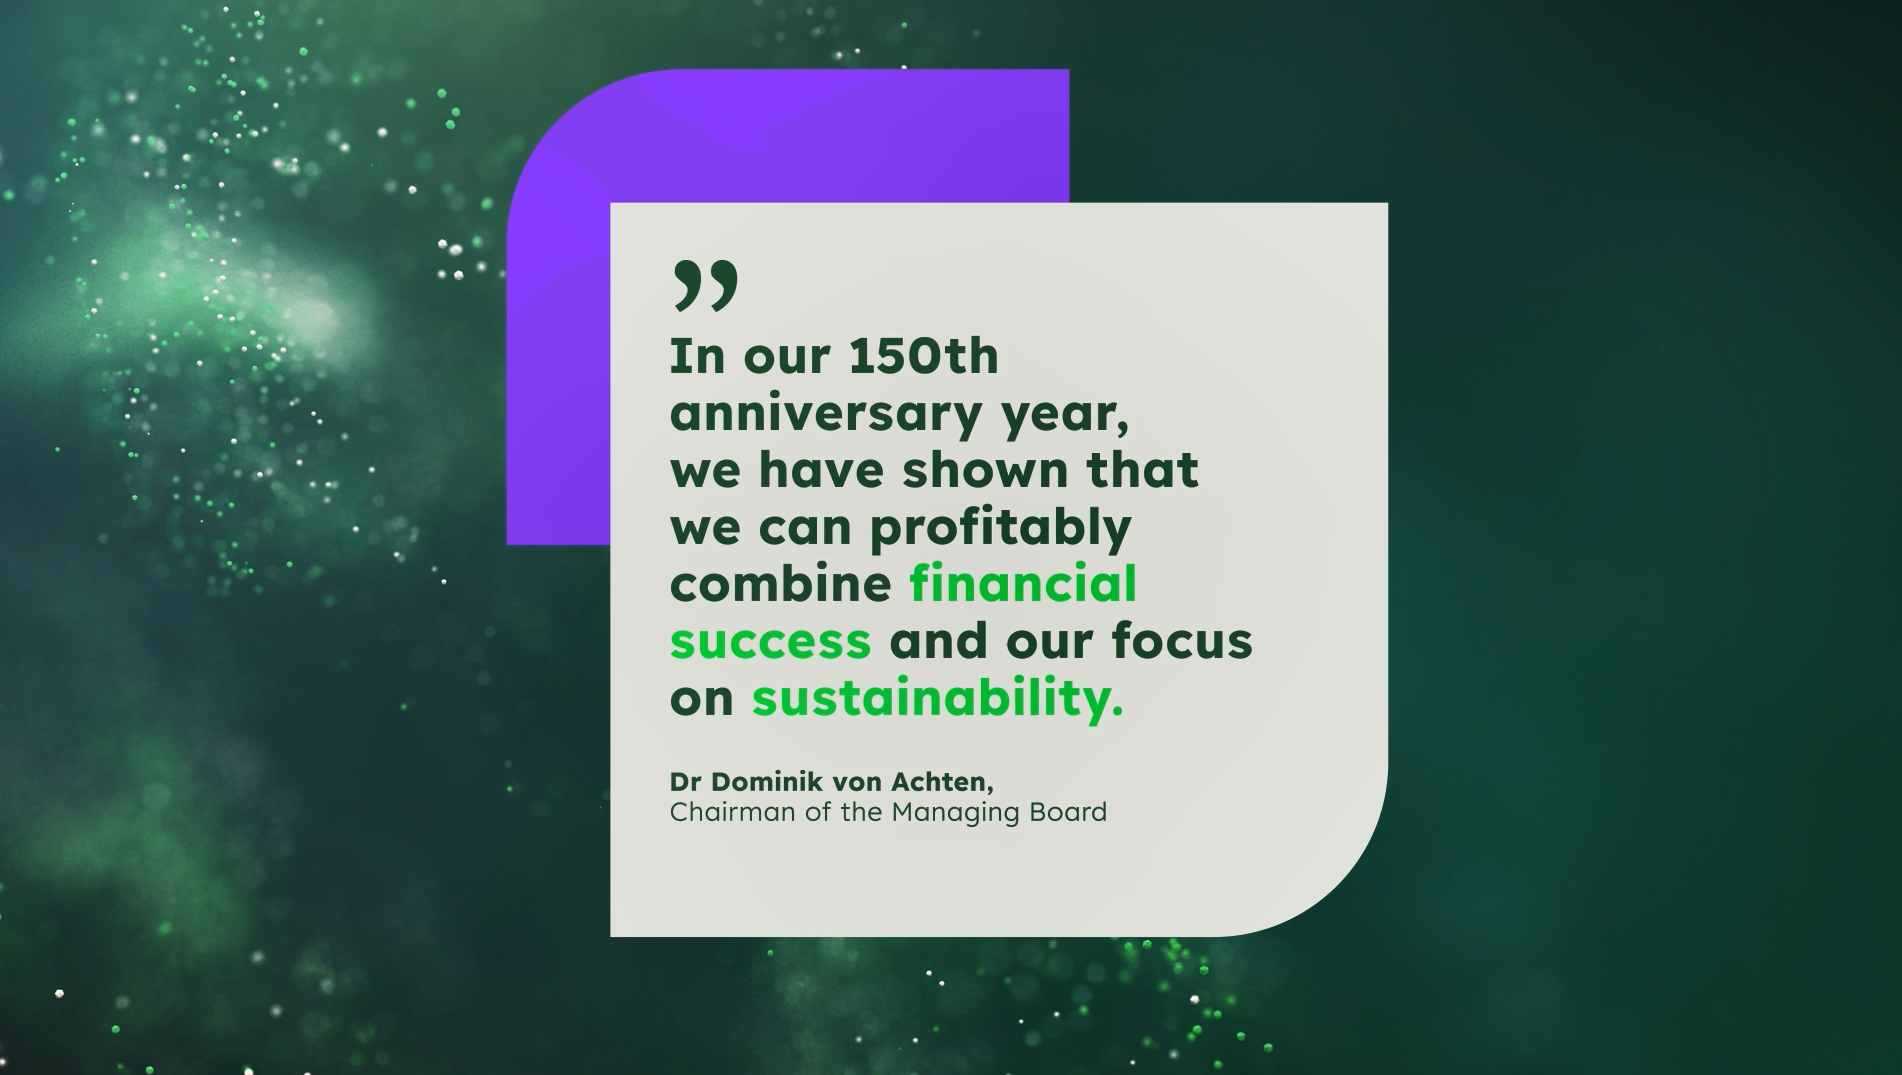 Start screen showing quote by Dr Dominik von Achten, Chairman of the Managing Board: "In our 150th anniversary year, we have shown that we can profitably combine financial success and our focus on sustainability." 